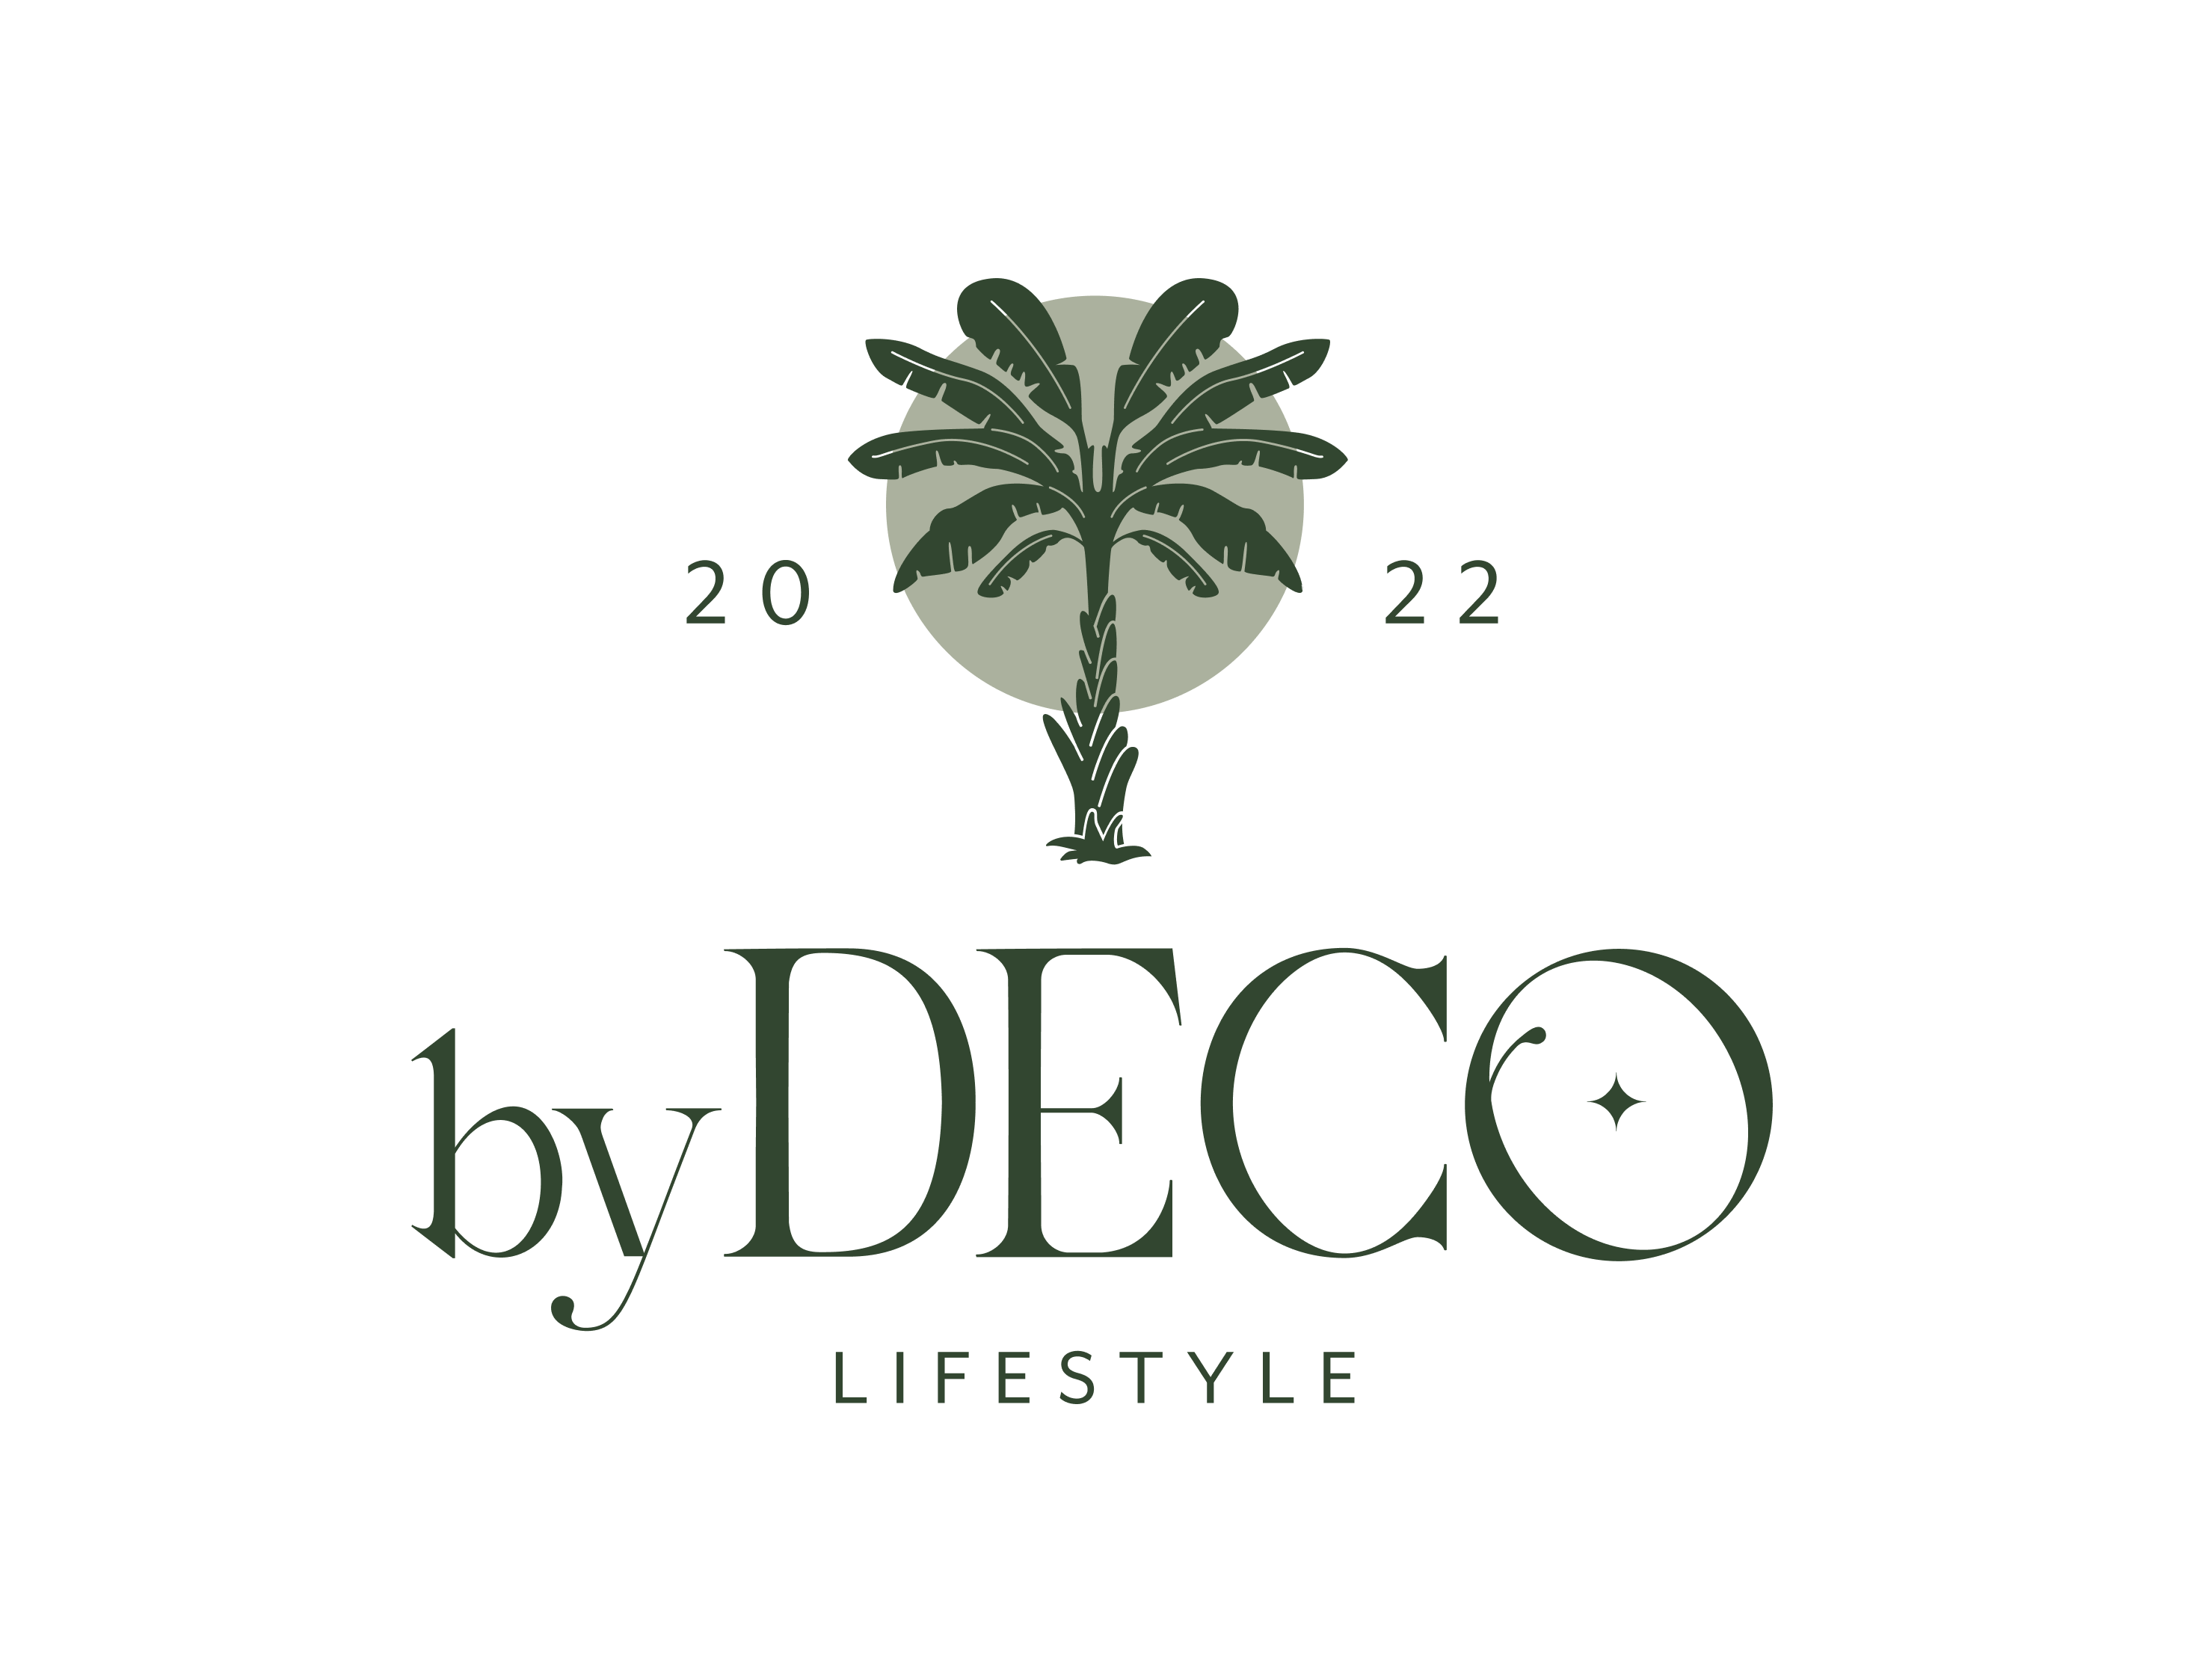 bydeco.co